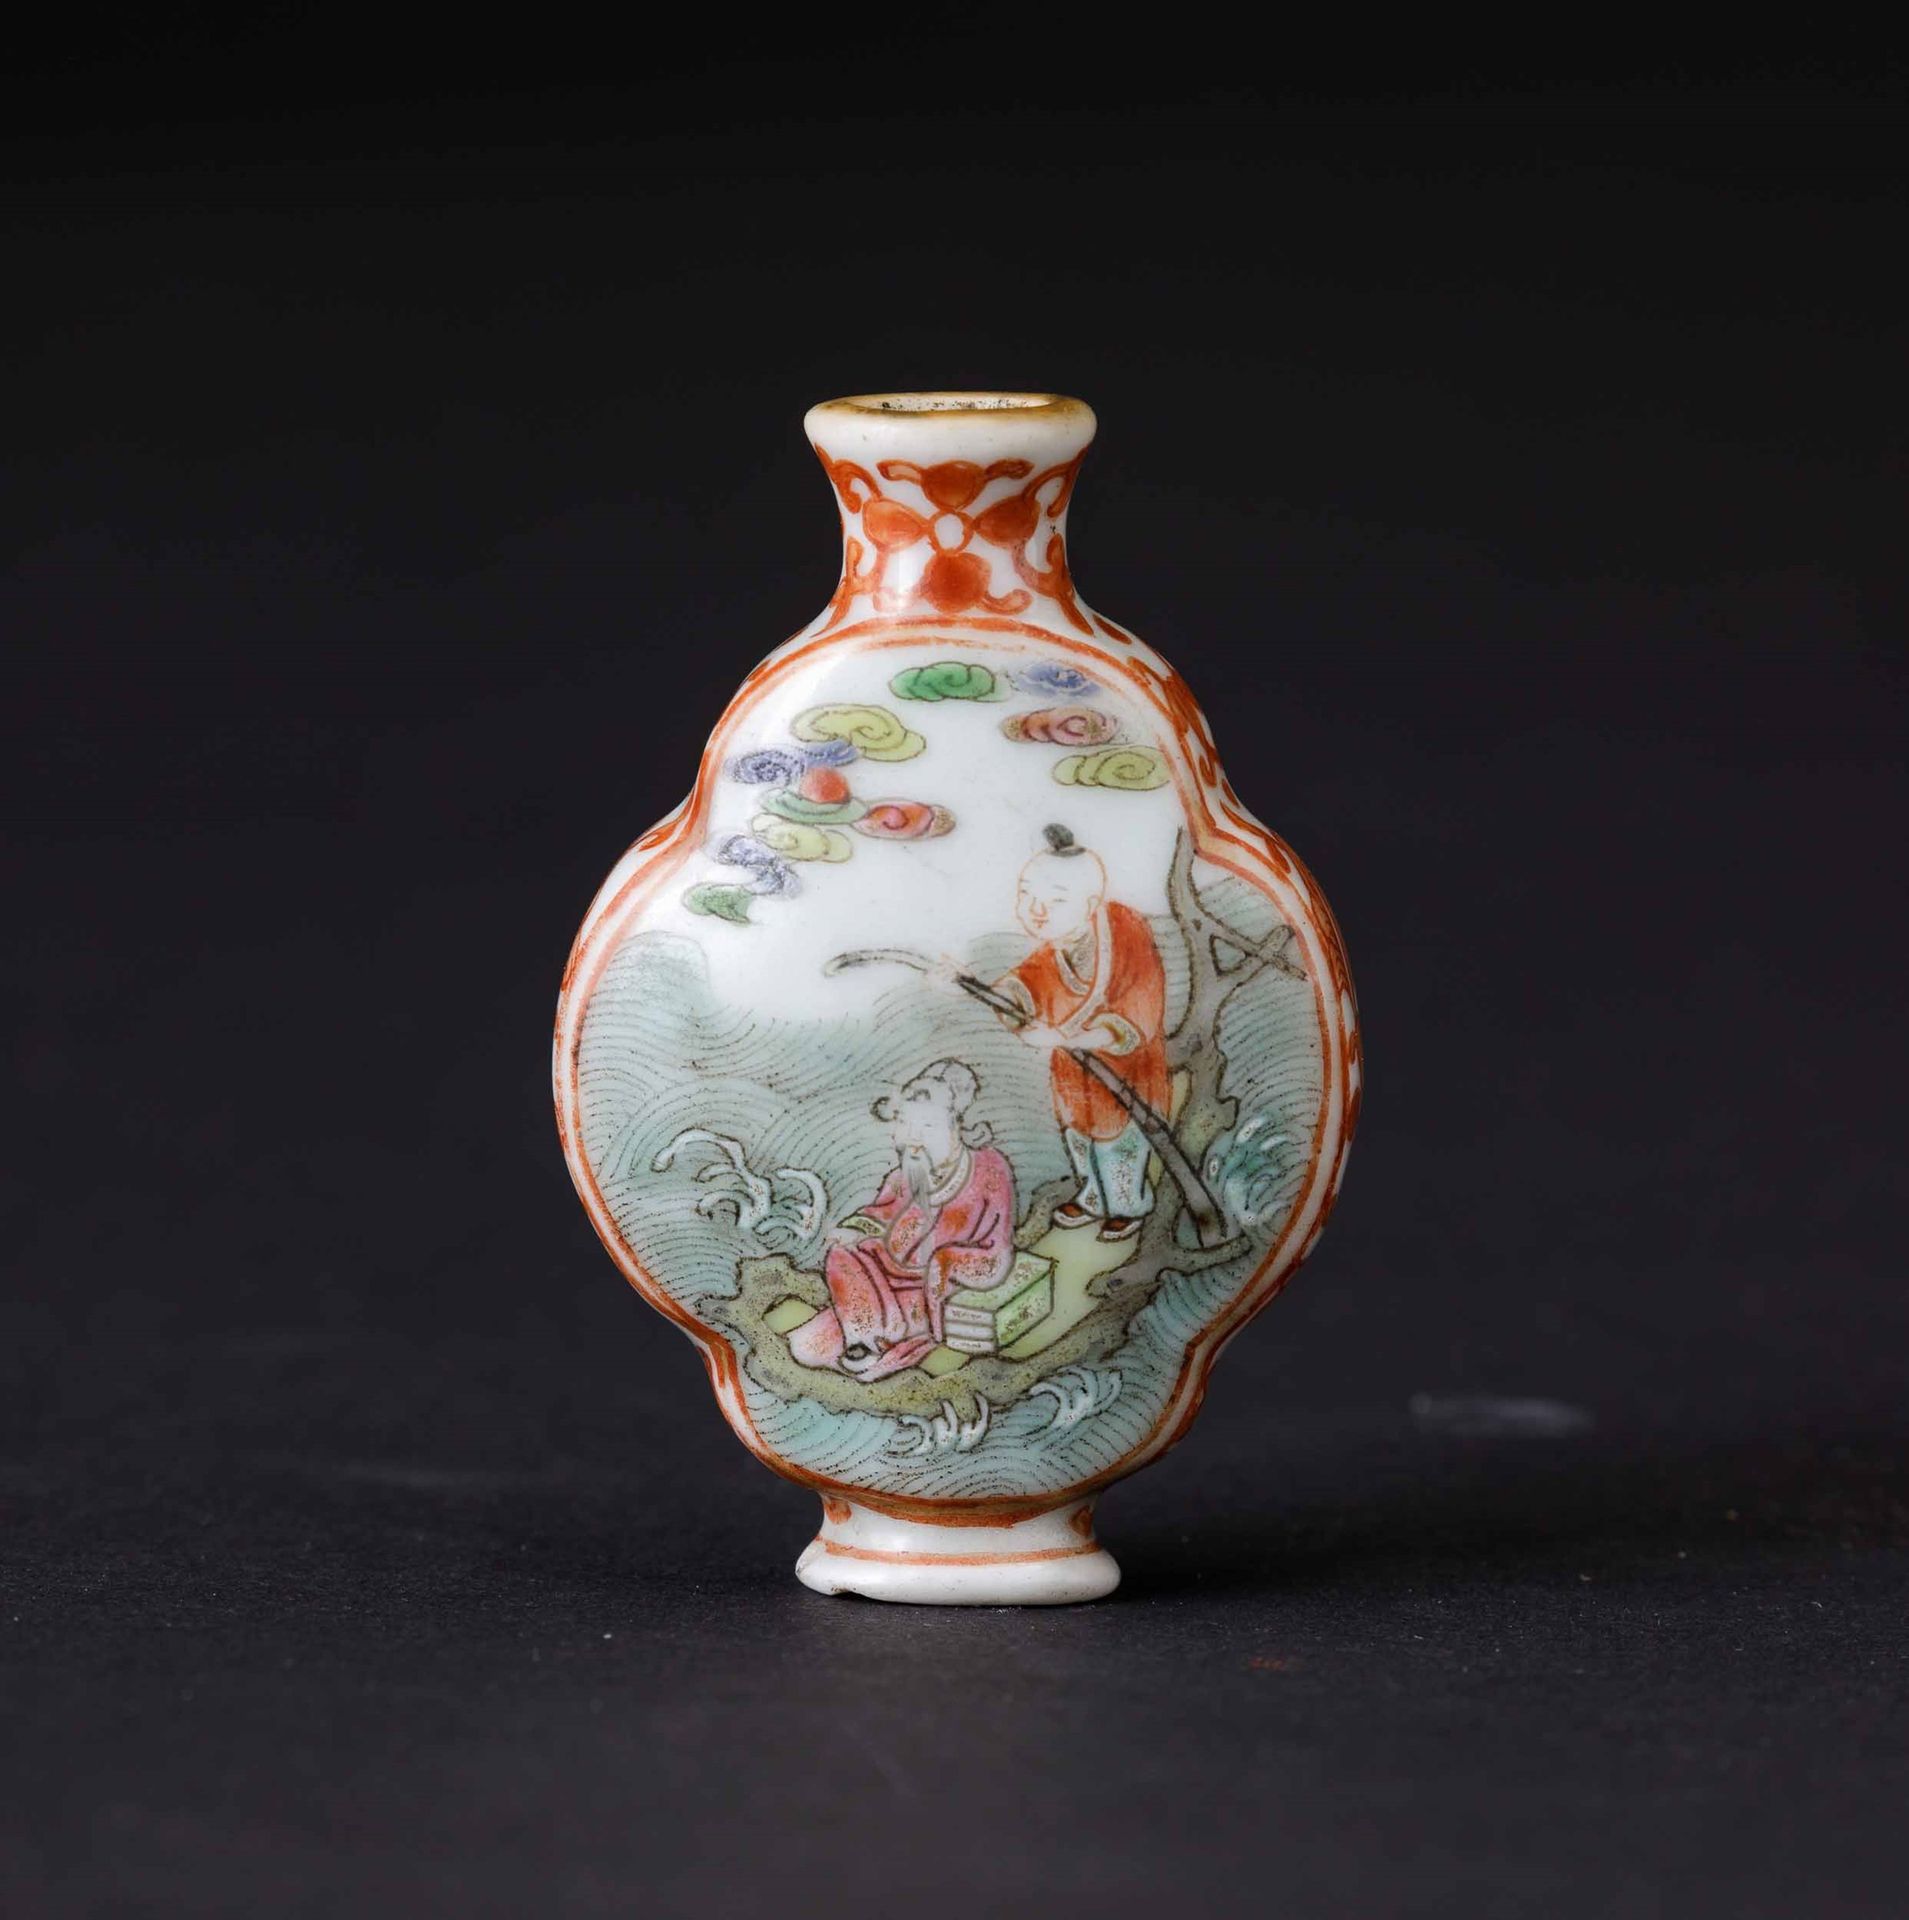 A porcelain snuff bottle, China, Qing Dynasty Jiaqing period (1796-1820). H 6cm